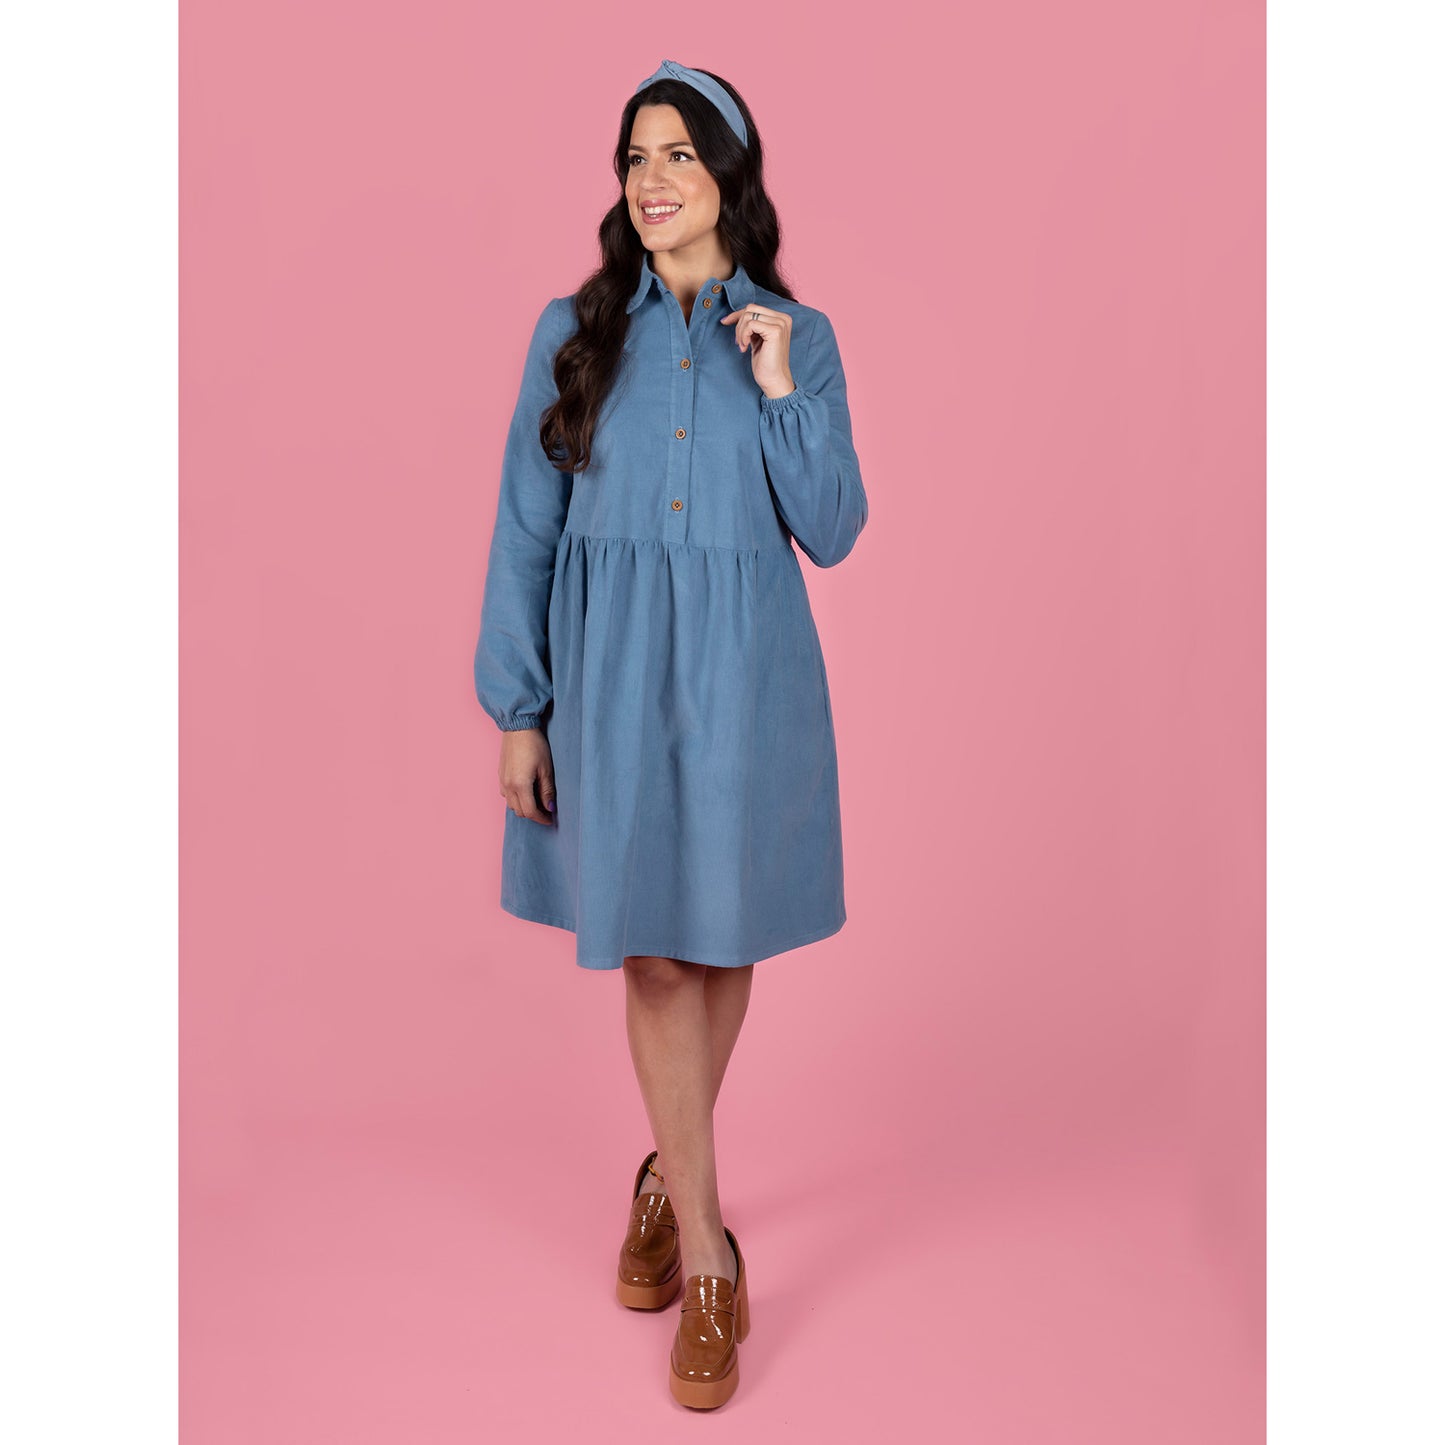 Lyra Shirt Dress Sewing Pattern - Tilly and the Buttons